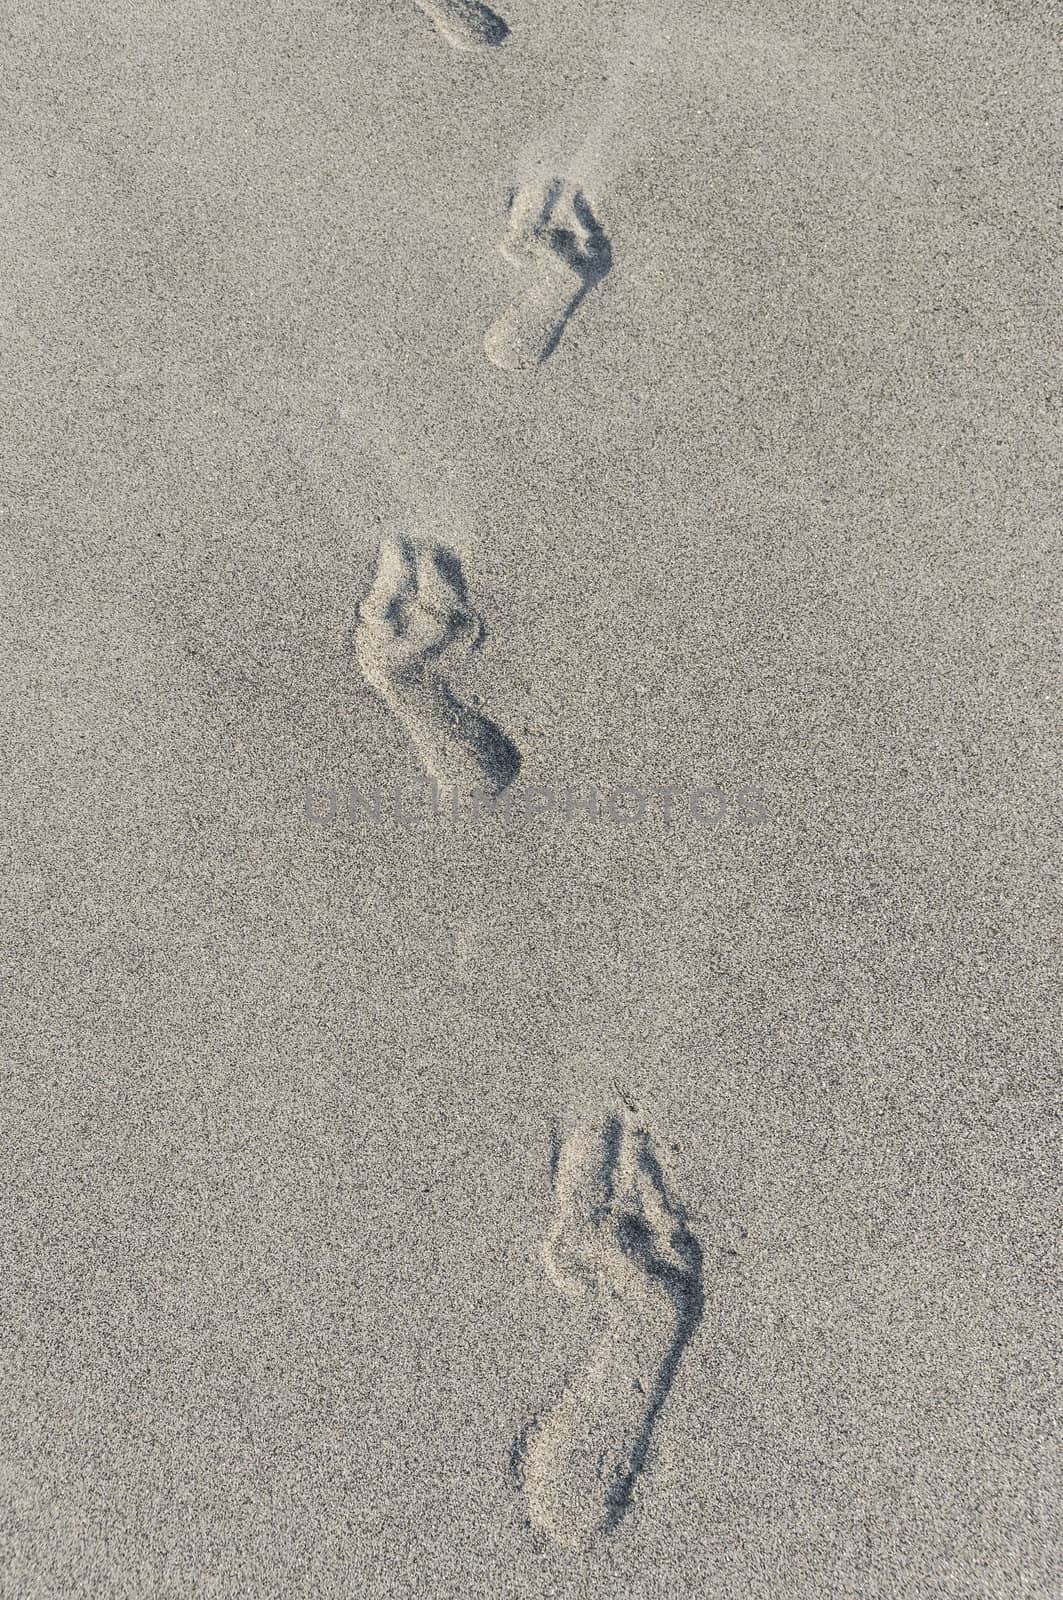 human footprints in the sand, vertical image